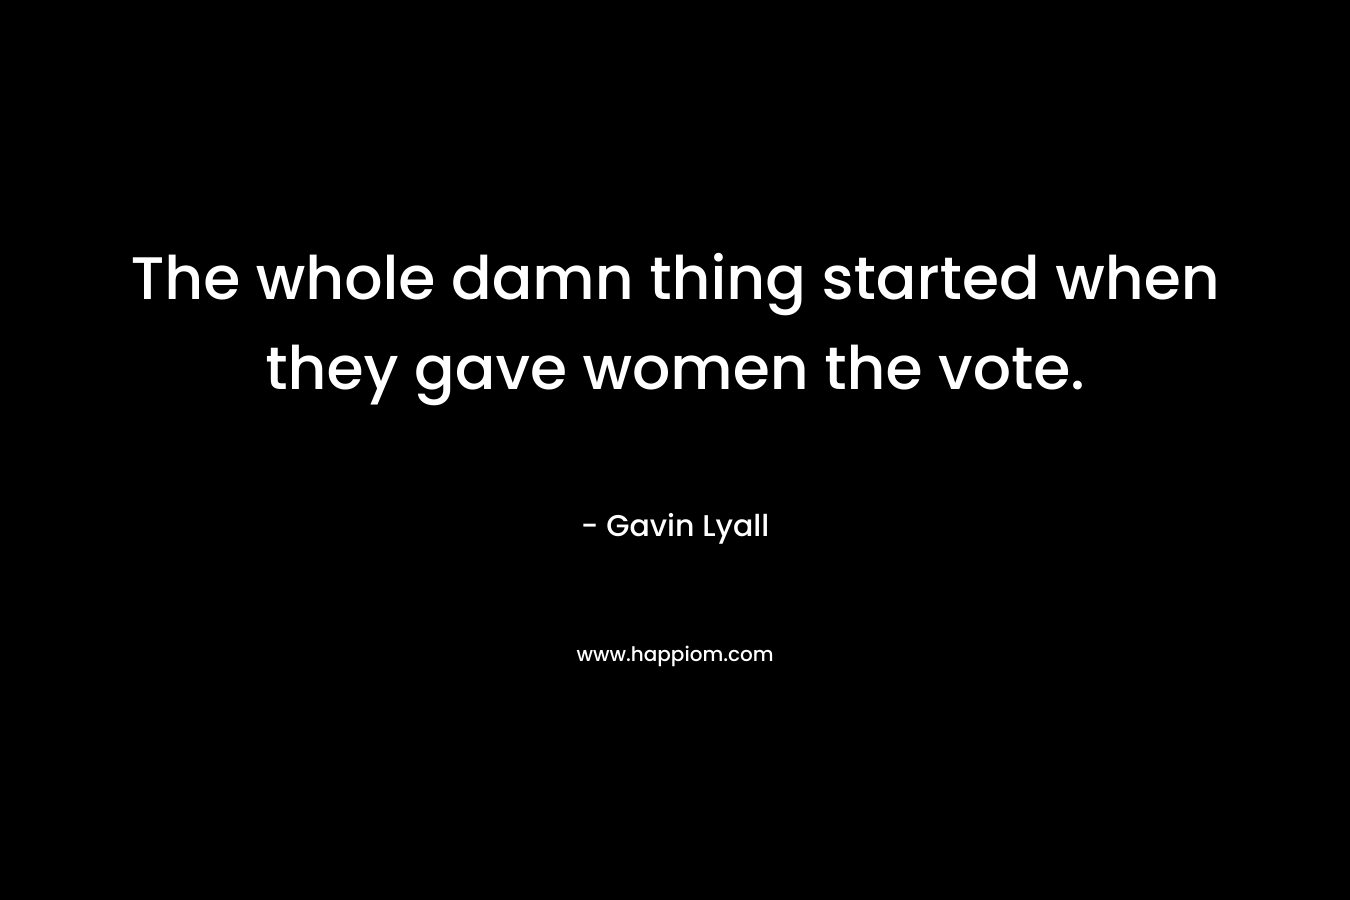 The whole damn thing started when they gave women the vote.